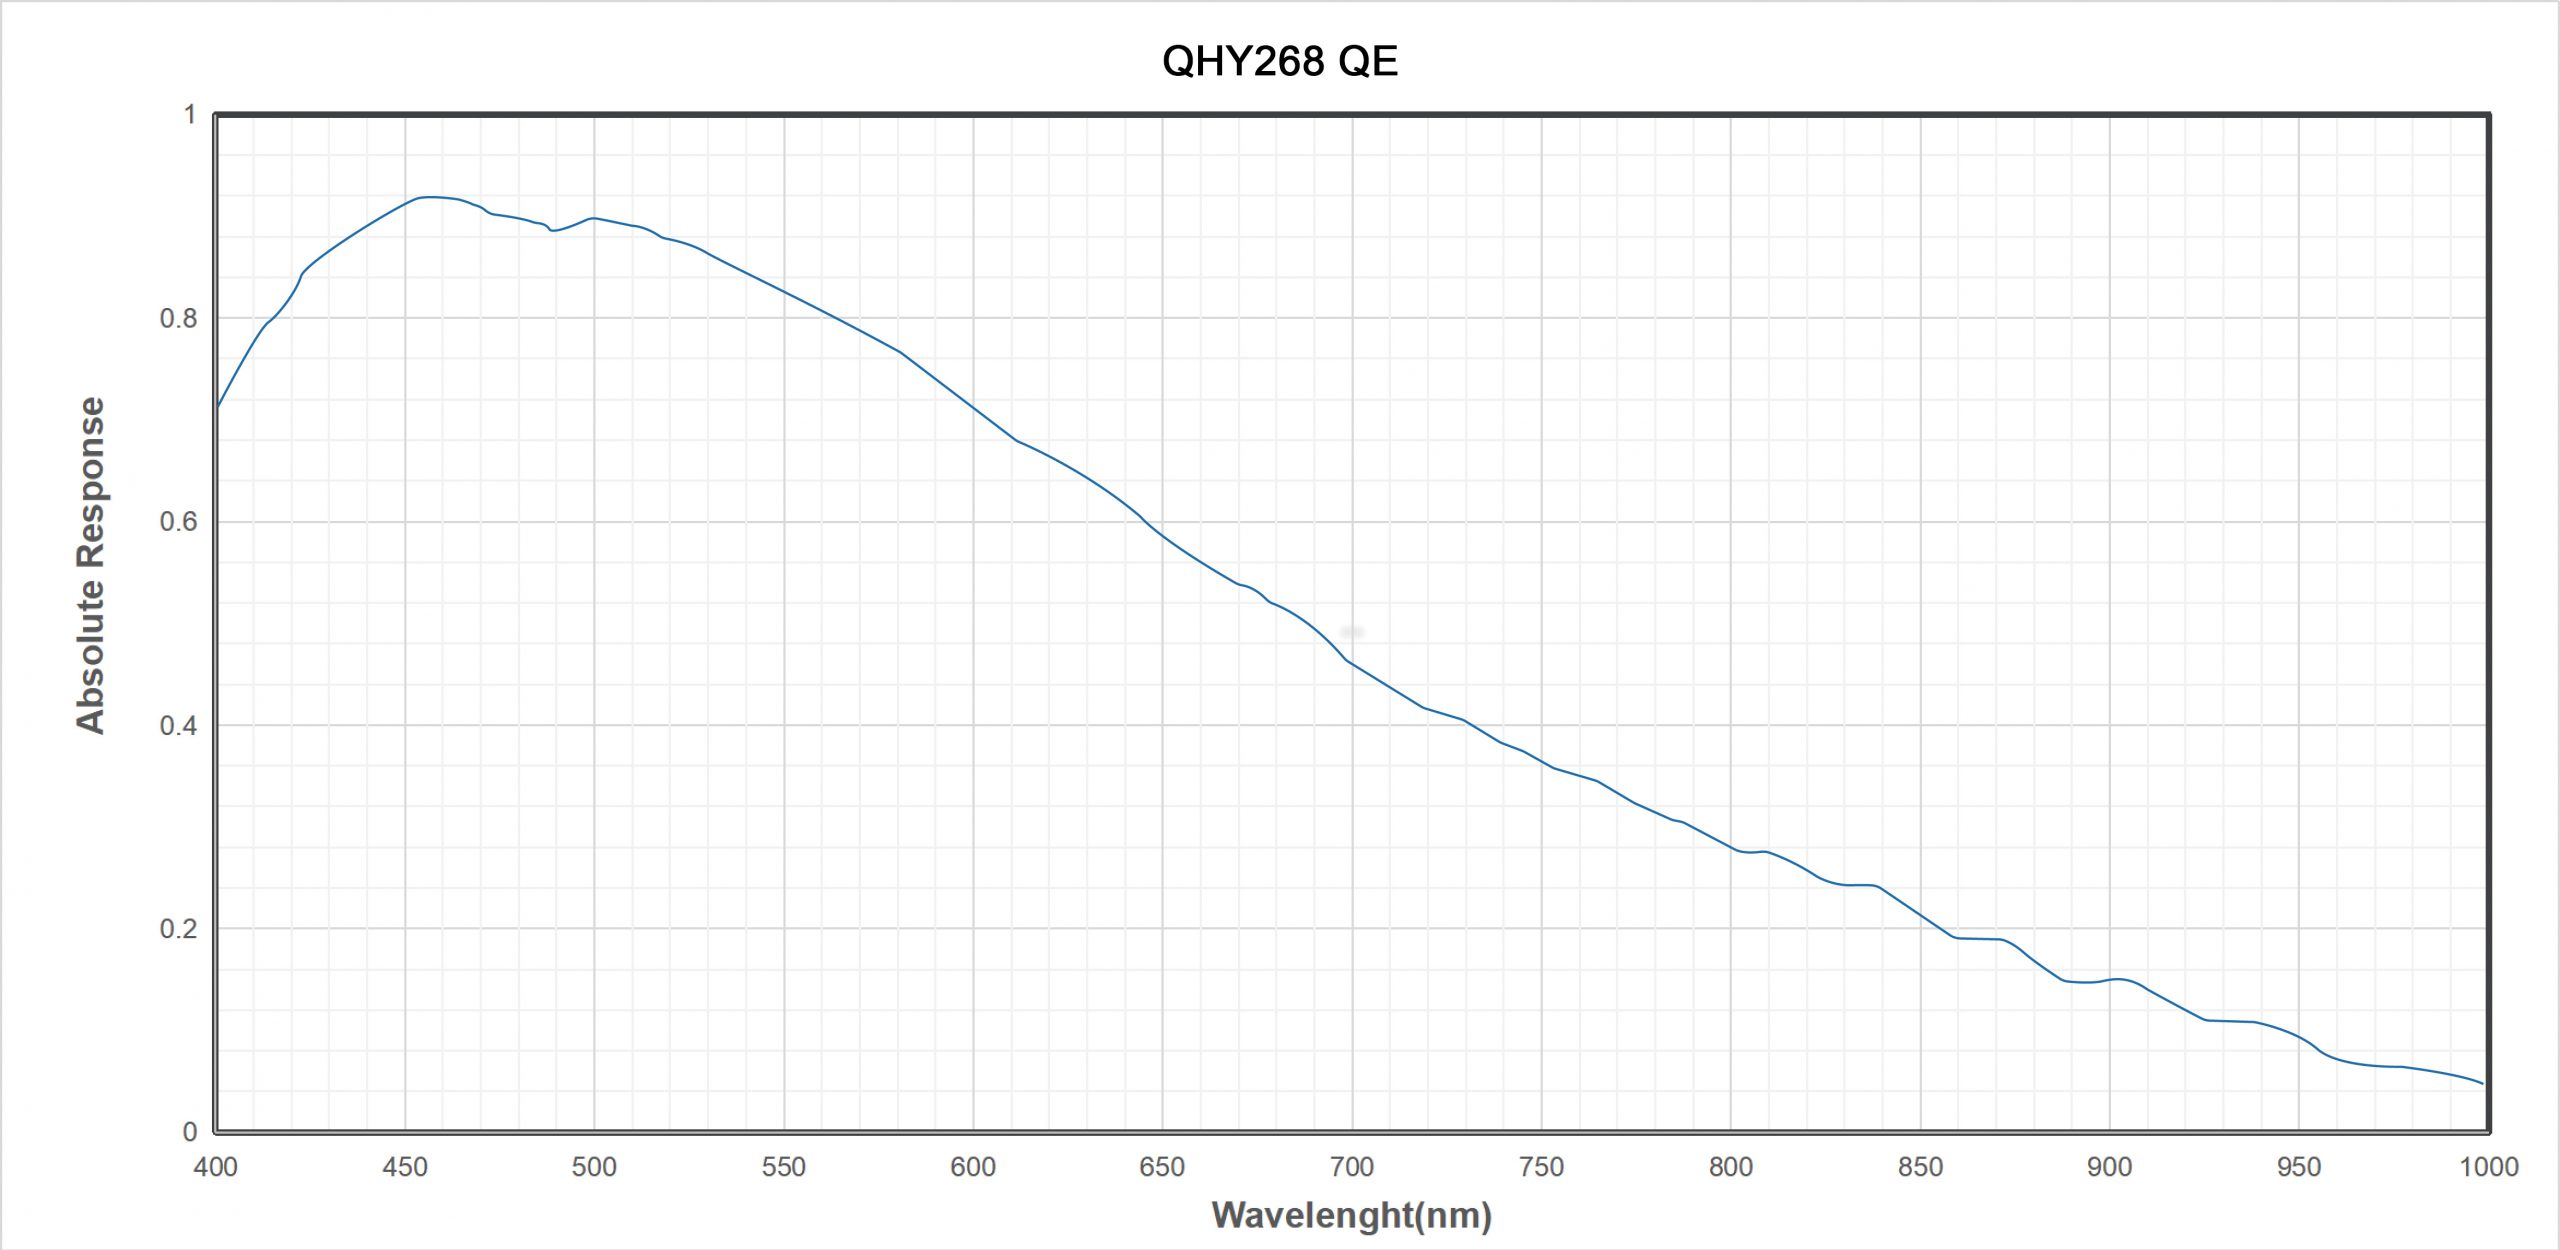 Measuring the absolute QE of the QHY268M